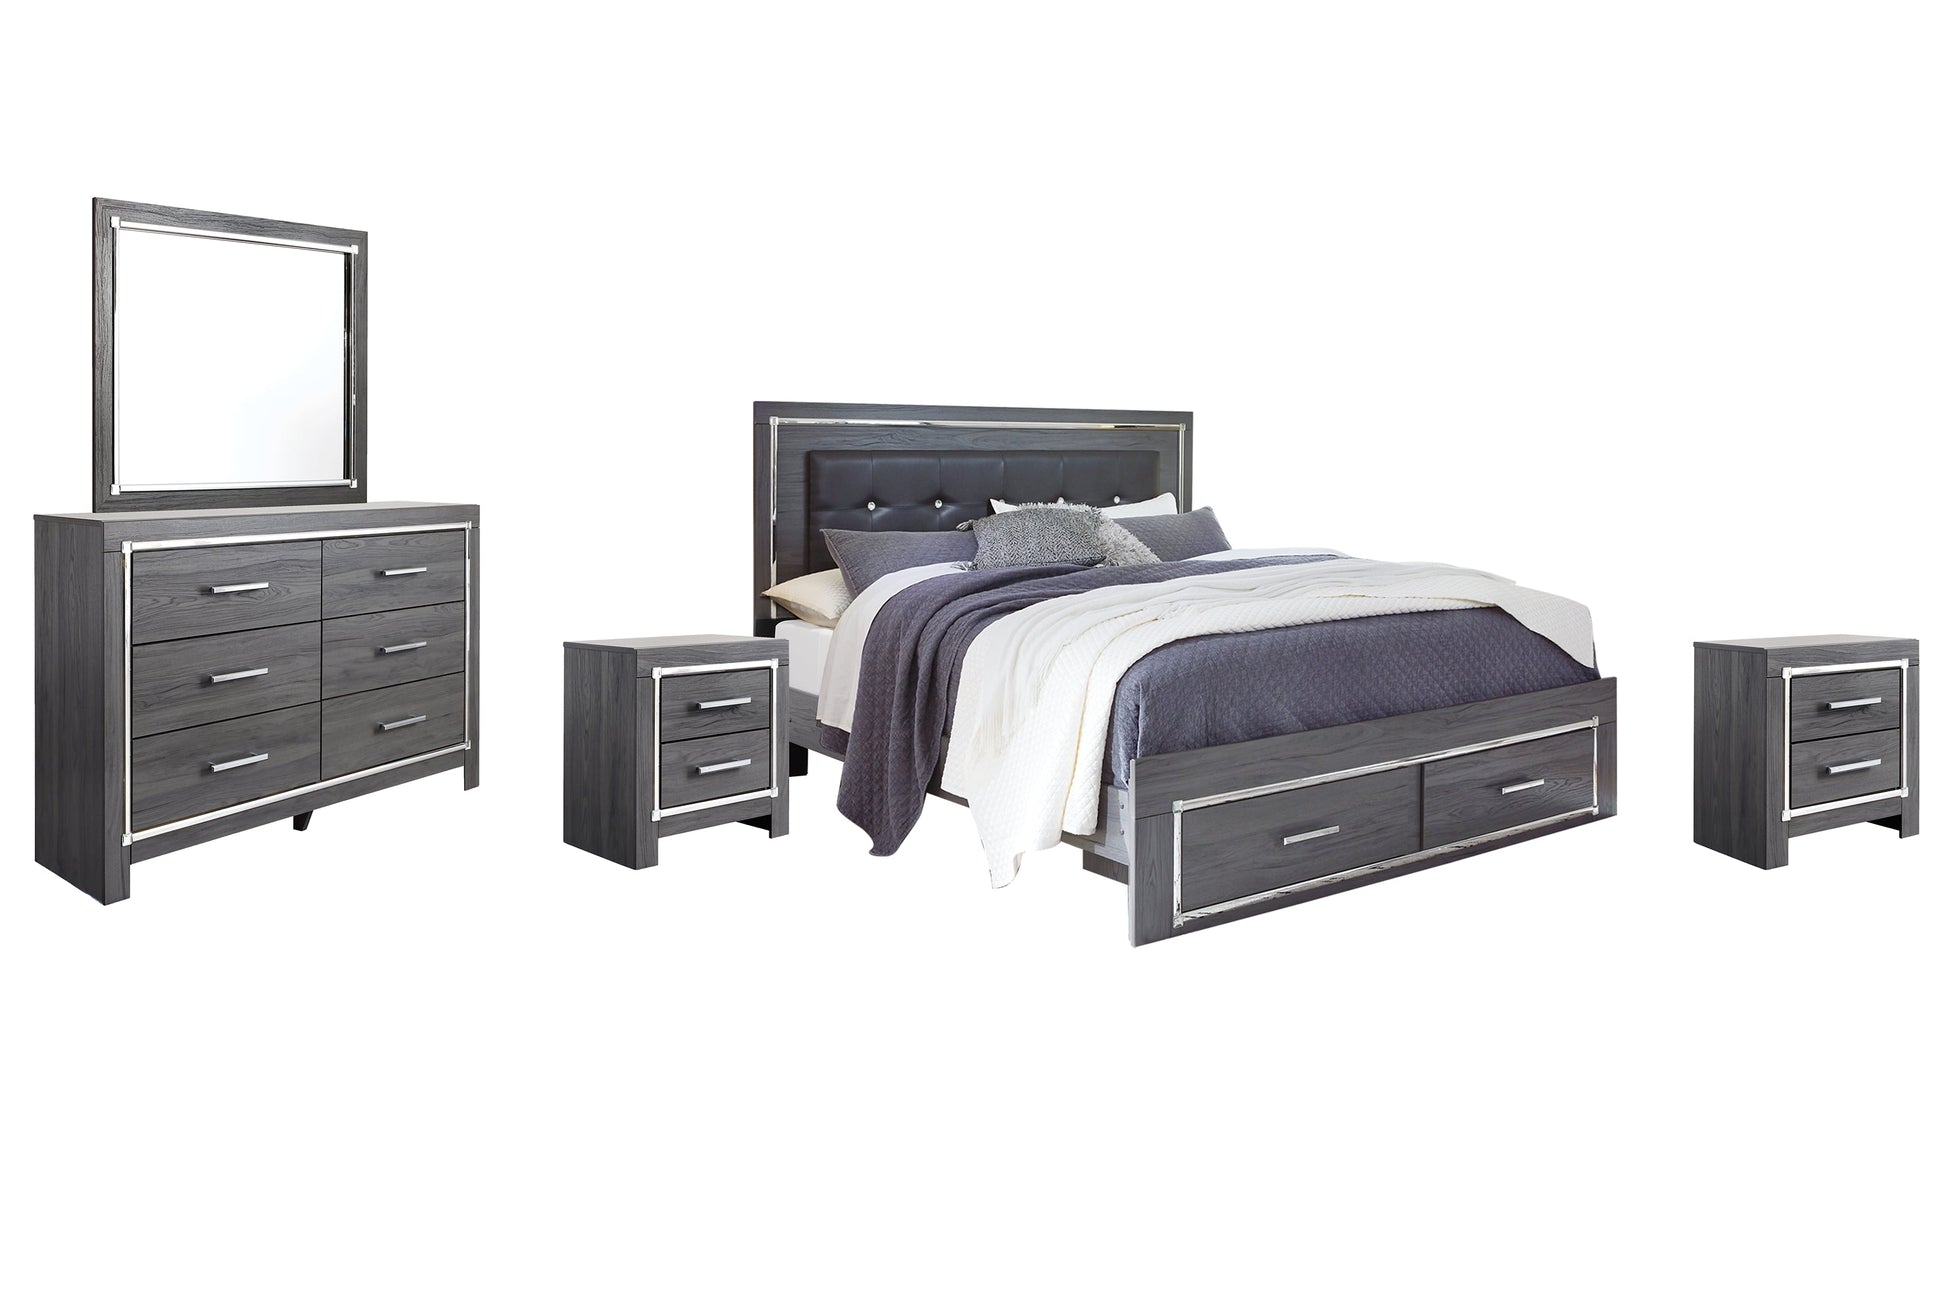 Lodanna King Panel Bed with 2 Storage Drawers with Mirrored Dresser and 2 Nightstands at Walker Mattress and Furniture Locations in Cedar Park and Belton TX.